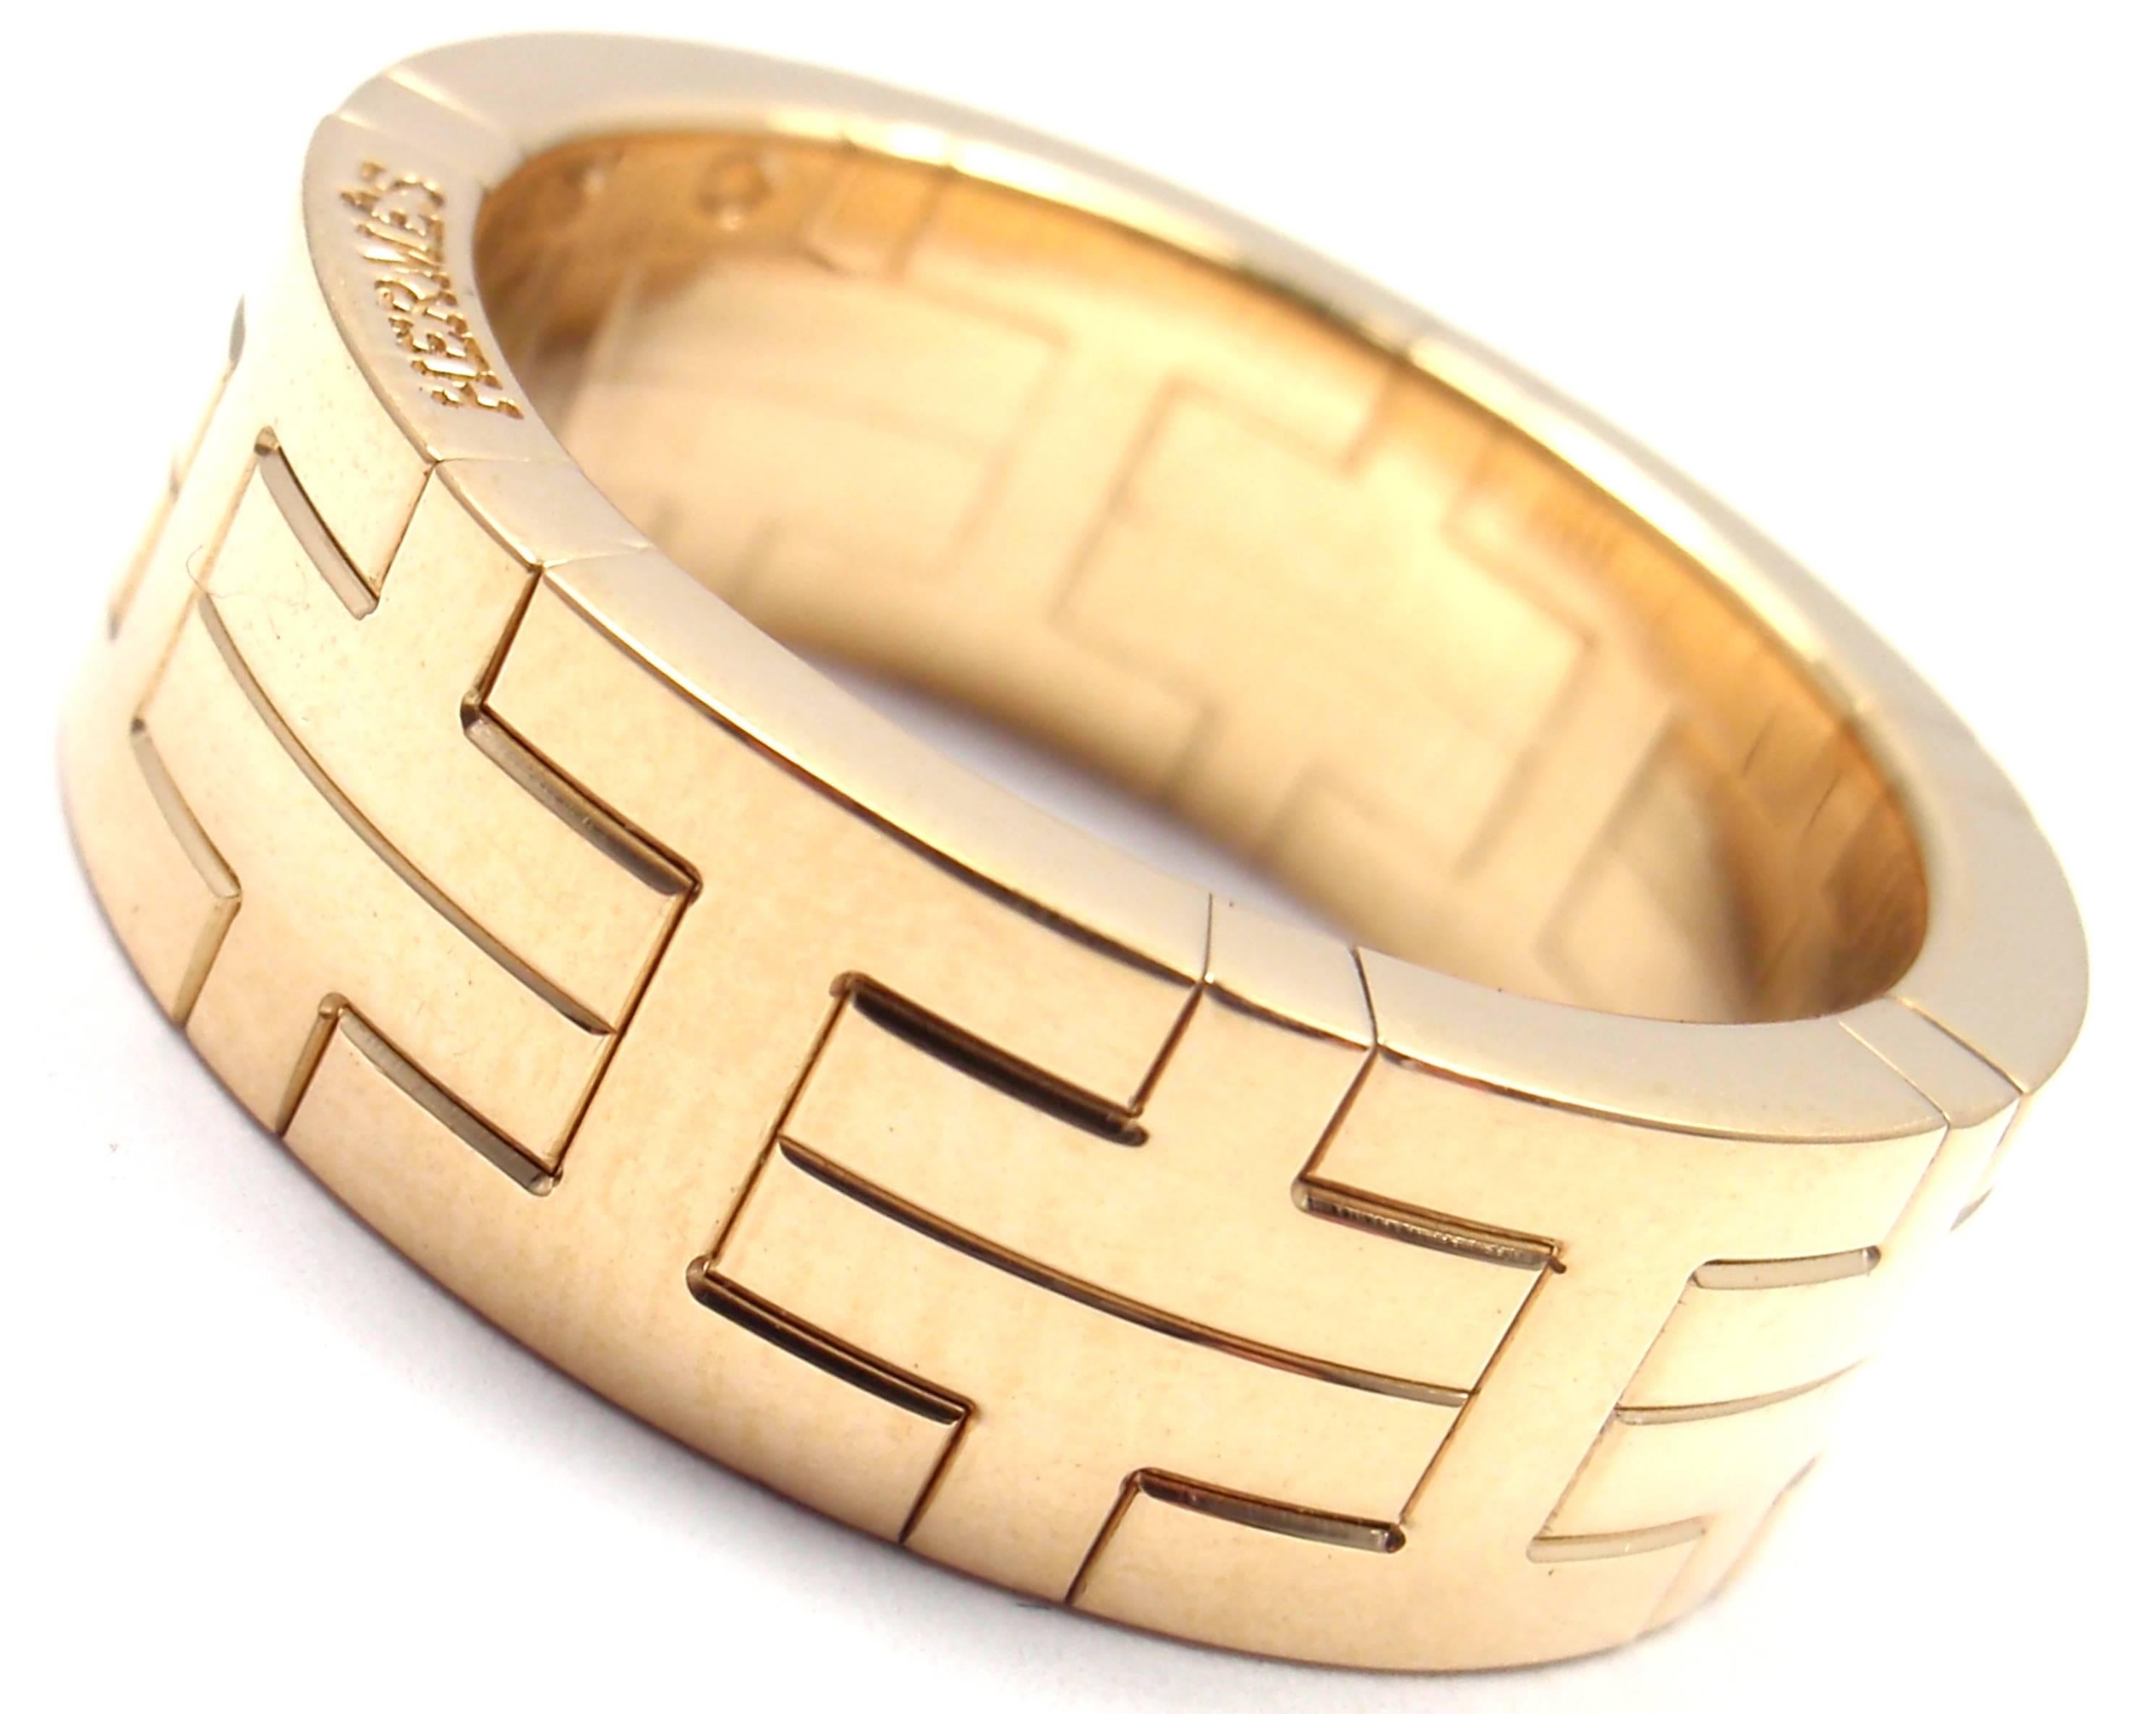 18k Yellow Gold H Motif Wide Band Ring by Hermes. 

Details: 
Ring Size: European 55 US 7 1/4
Weight: 11.1 grams
Band Width: 8mm
Stamped Hallmarks: HERMES 750 55 04 03942
*Free Shipping within the United States*

YOUR PRICE: $2,000

T1237ard